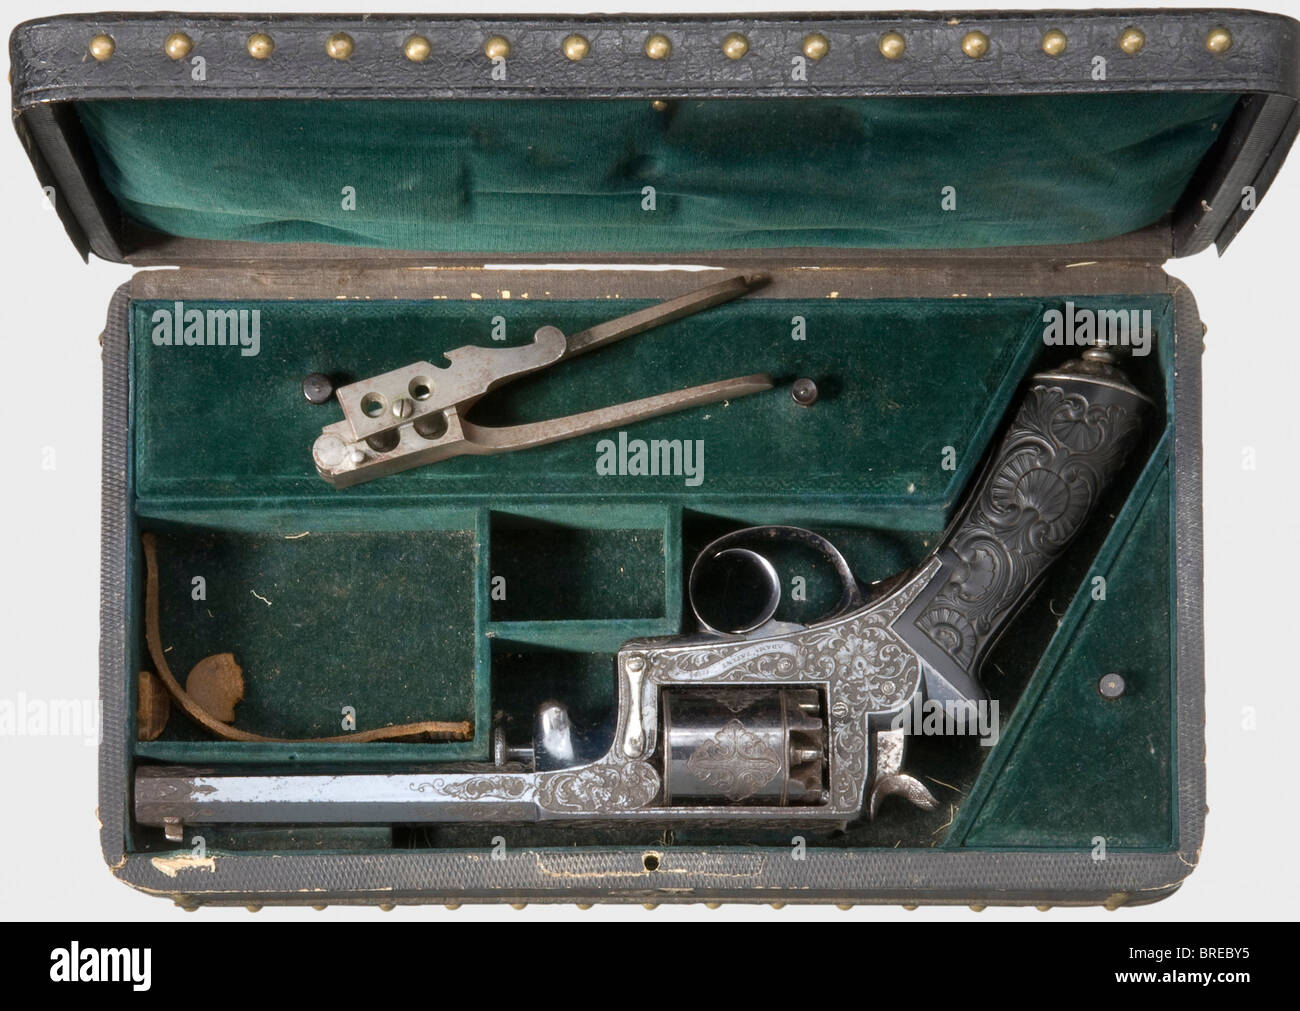 A fine cased Adams percussion revolver, Liège, circa 1855. Double action, cal..455, no. 11068. Octagonal barrel with a side-mounted loading rod. The frame is inscribed 'Adams Patent' and 'Adams Patent 1851' on the side. Ebony grip with finely carved rocaille decoration. Beautifully cut iron pommel cap with a small disk pommel. Metal parts display deeply chiselled, high quality, vine decoration. Original high gloss bluing, more than 90 % preserved, with a slight rust film in places. Length 31.5 cm. In the matching, cloth lined case with decorative brass nails. A, Stock Photo